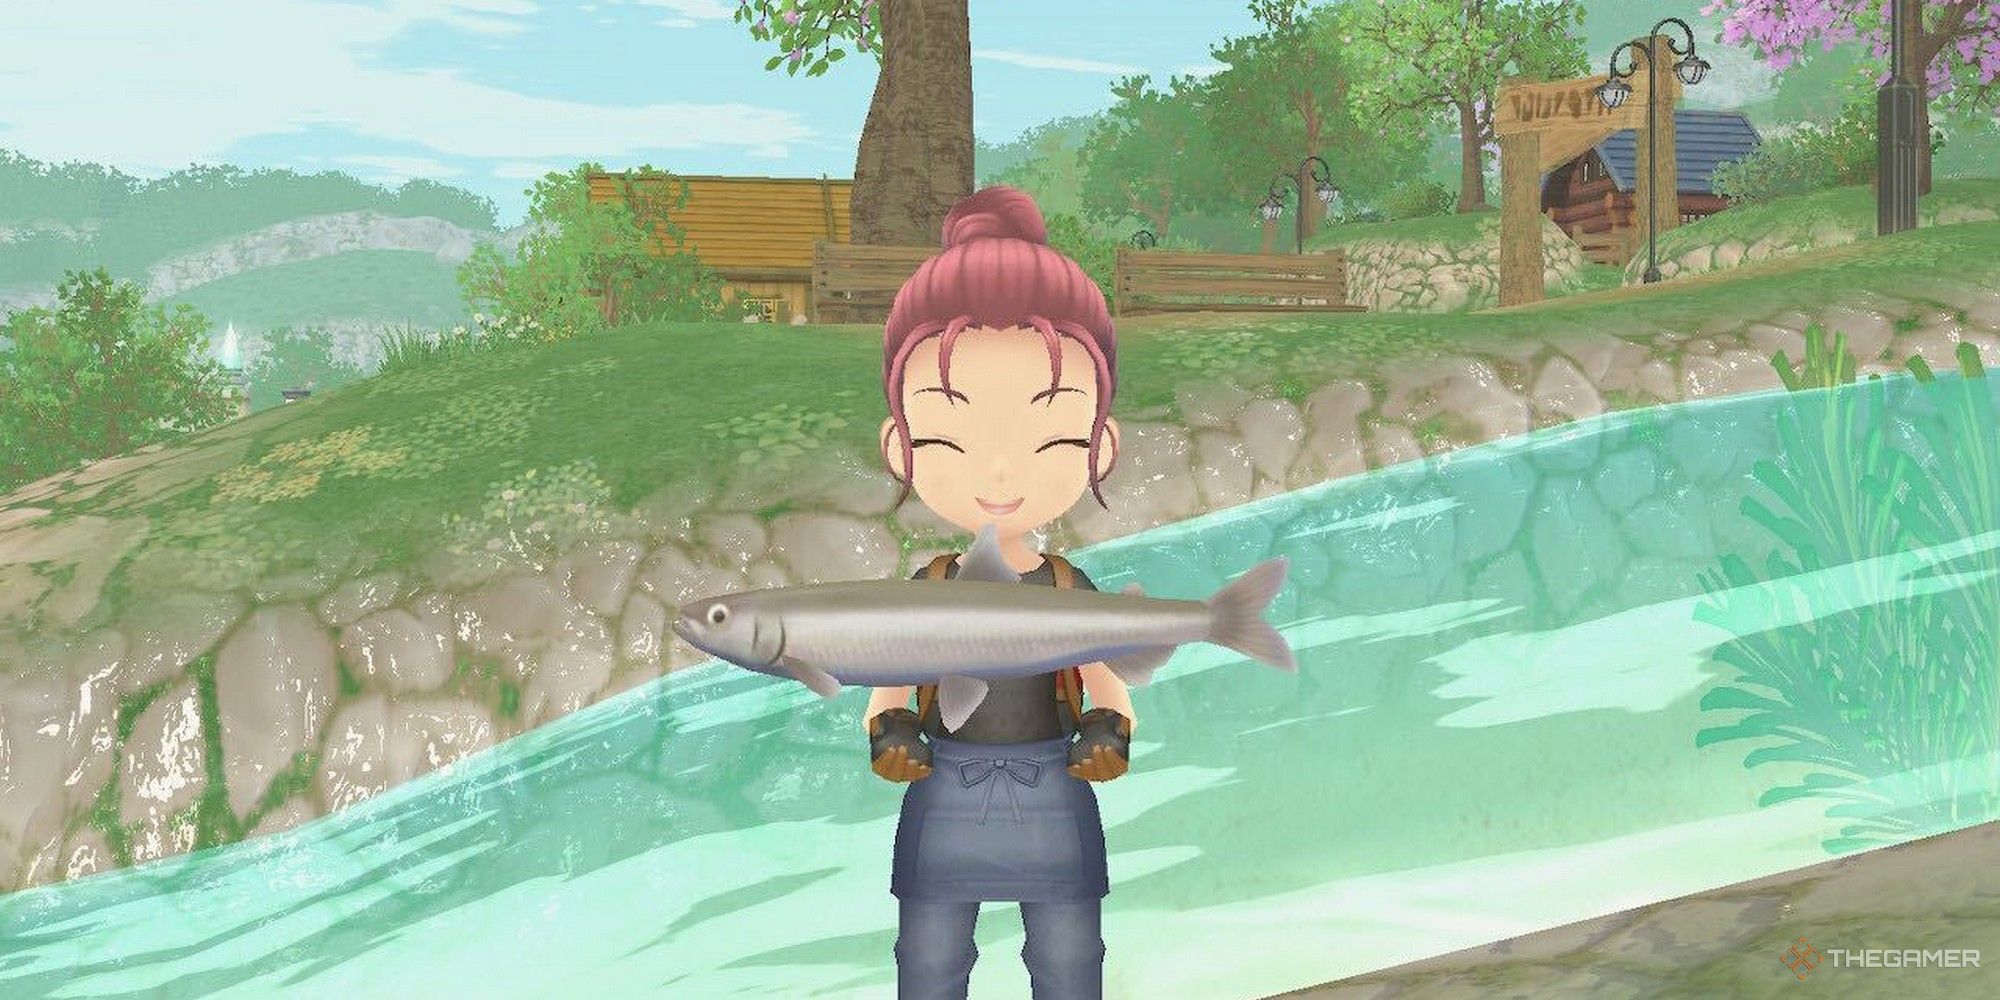 How To Get A Fishing Rod In Story Of Seasons: A Wonderful Life